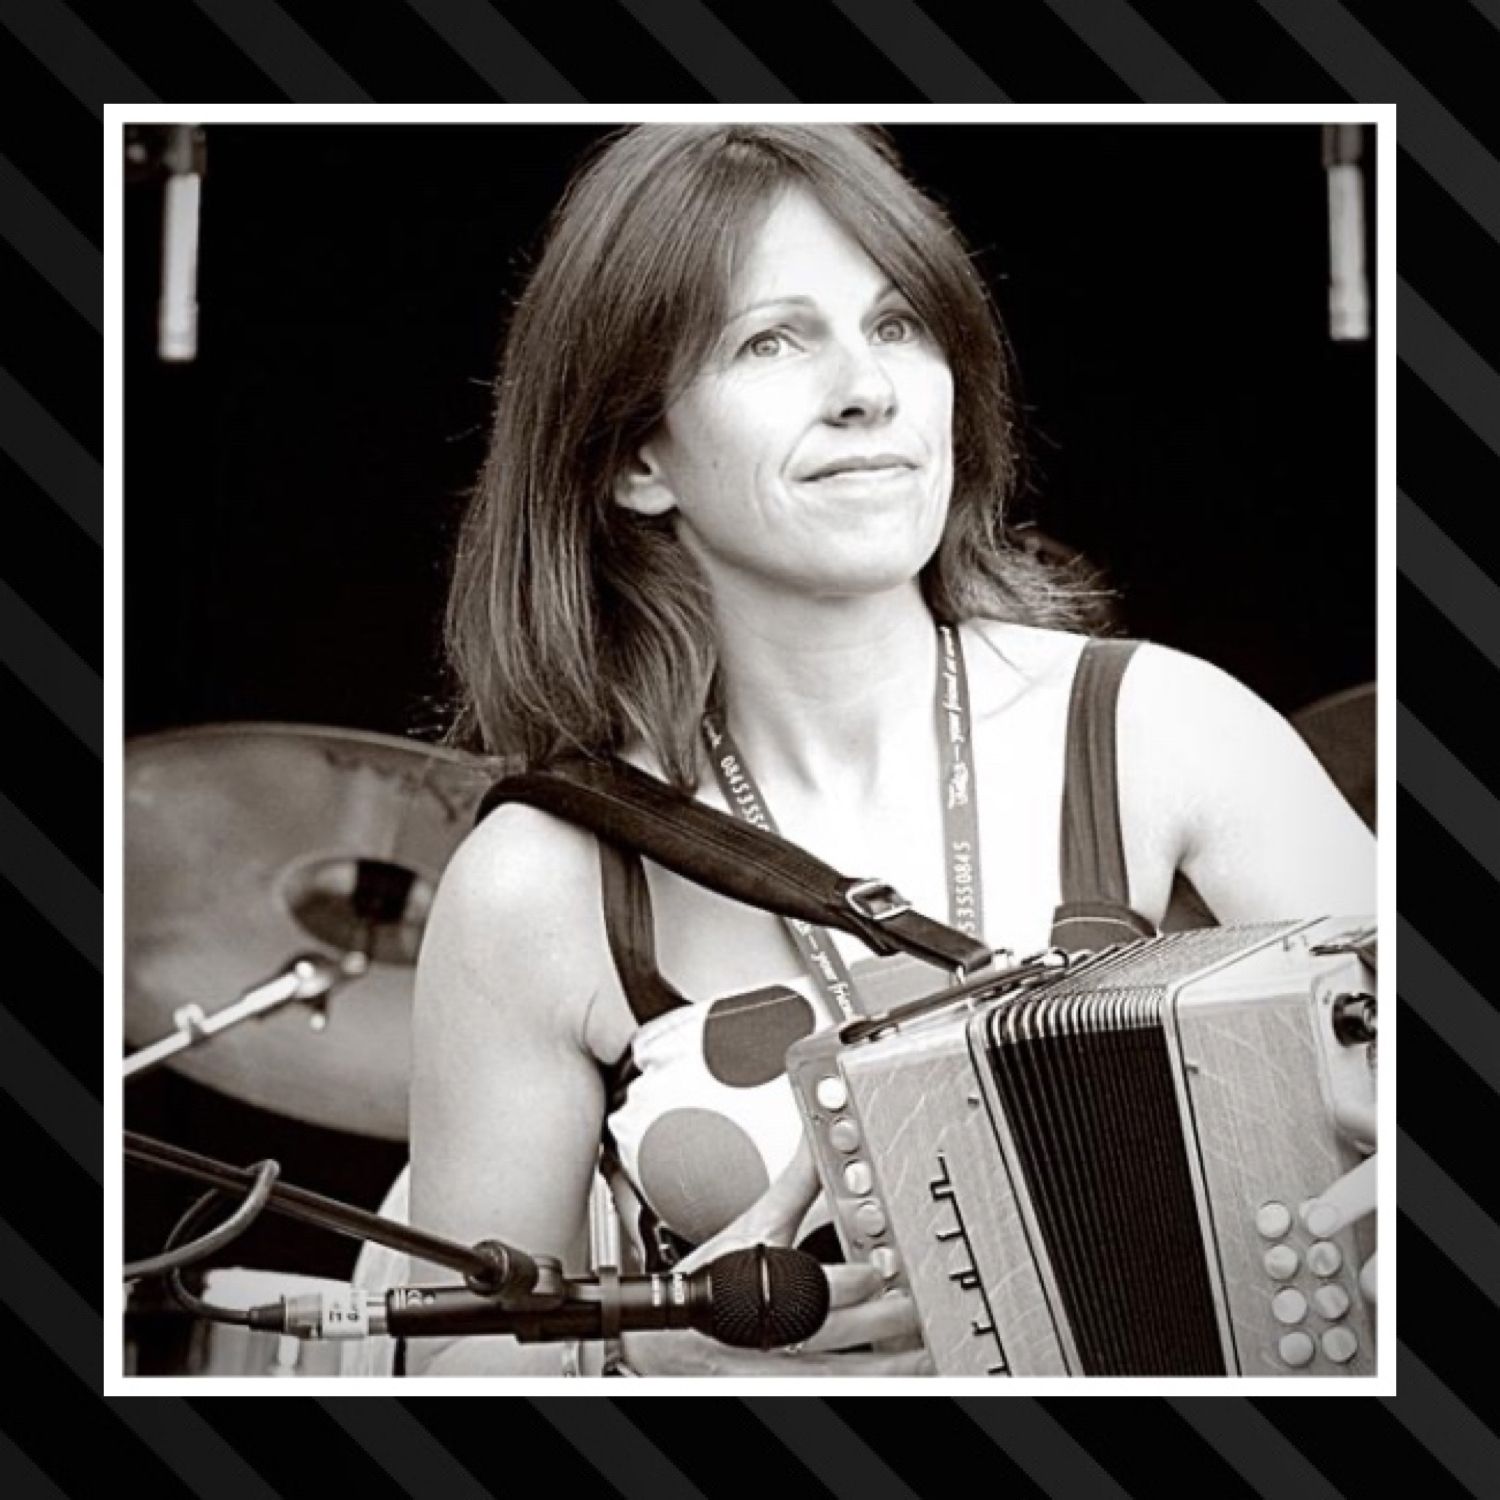 6:  The one with Sharon Shannon Image